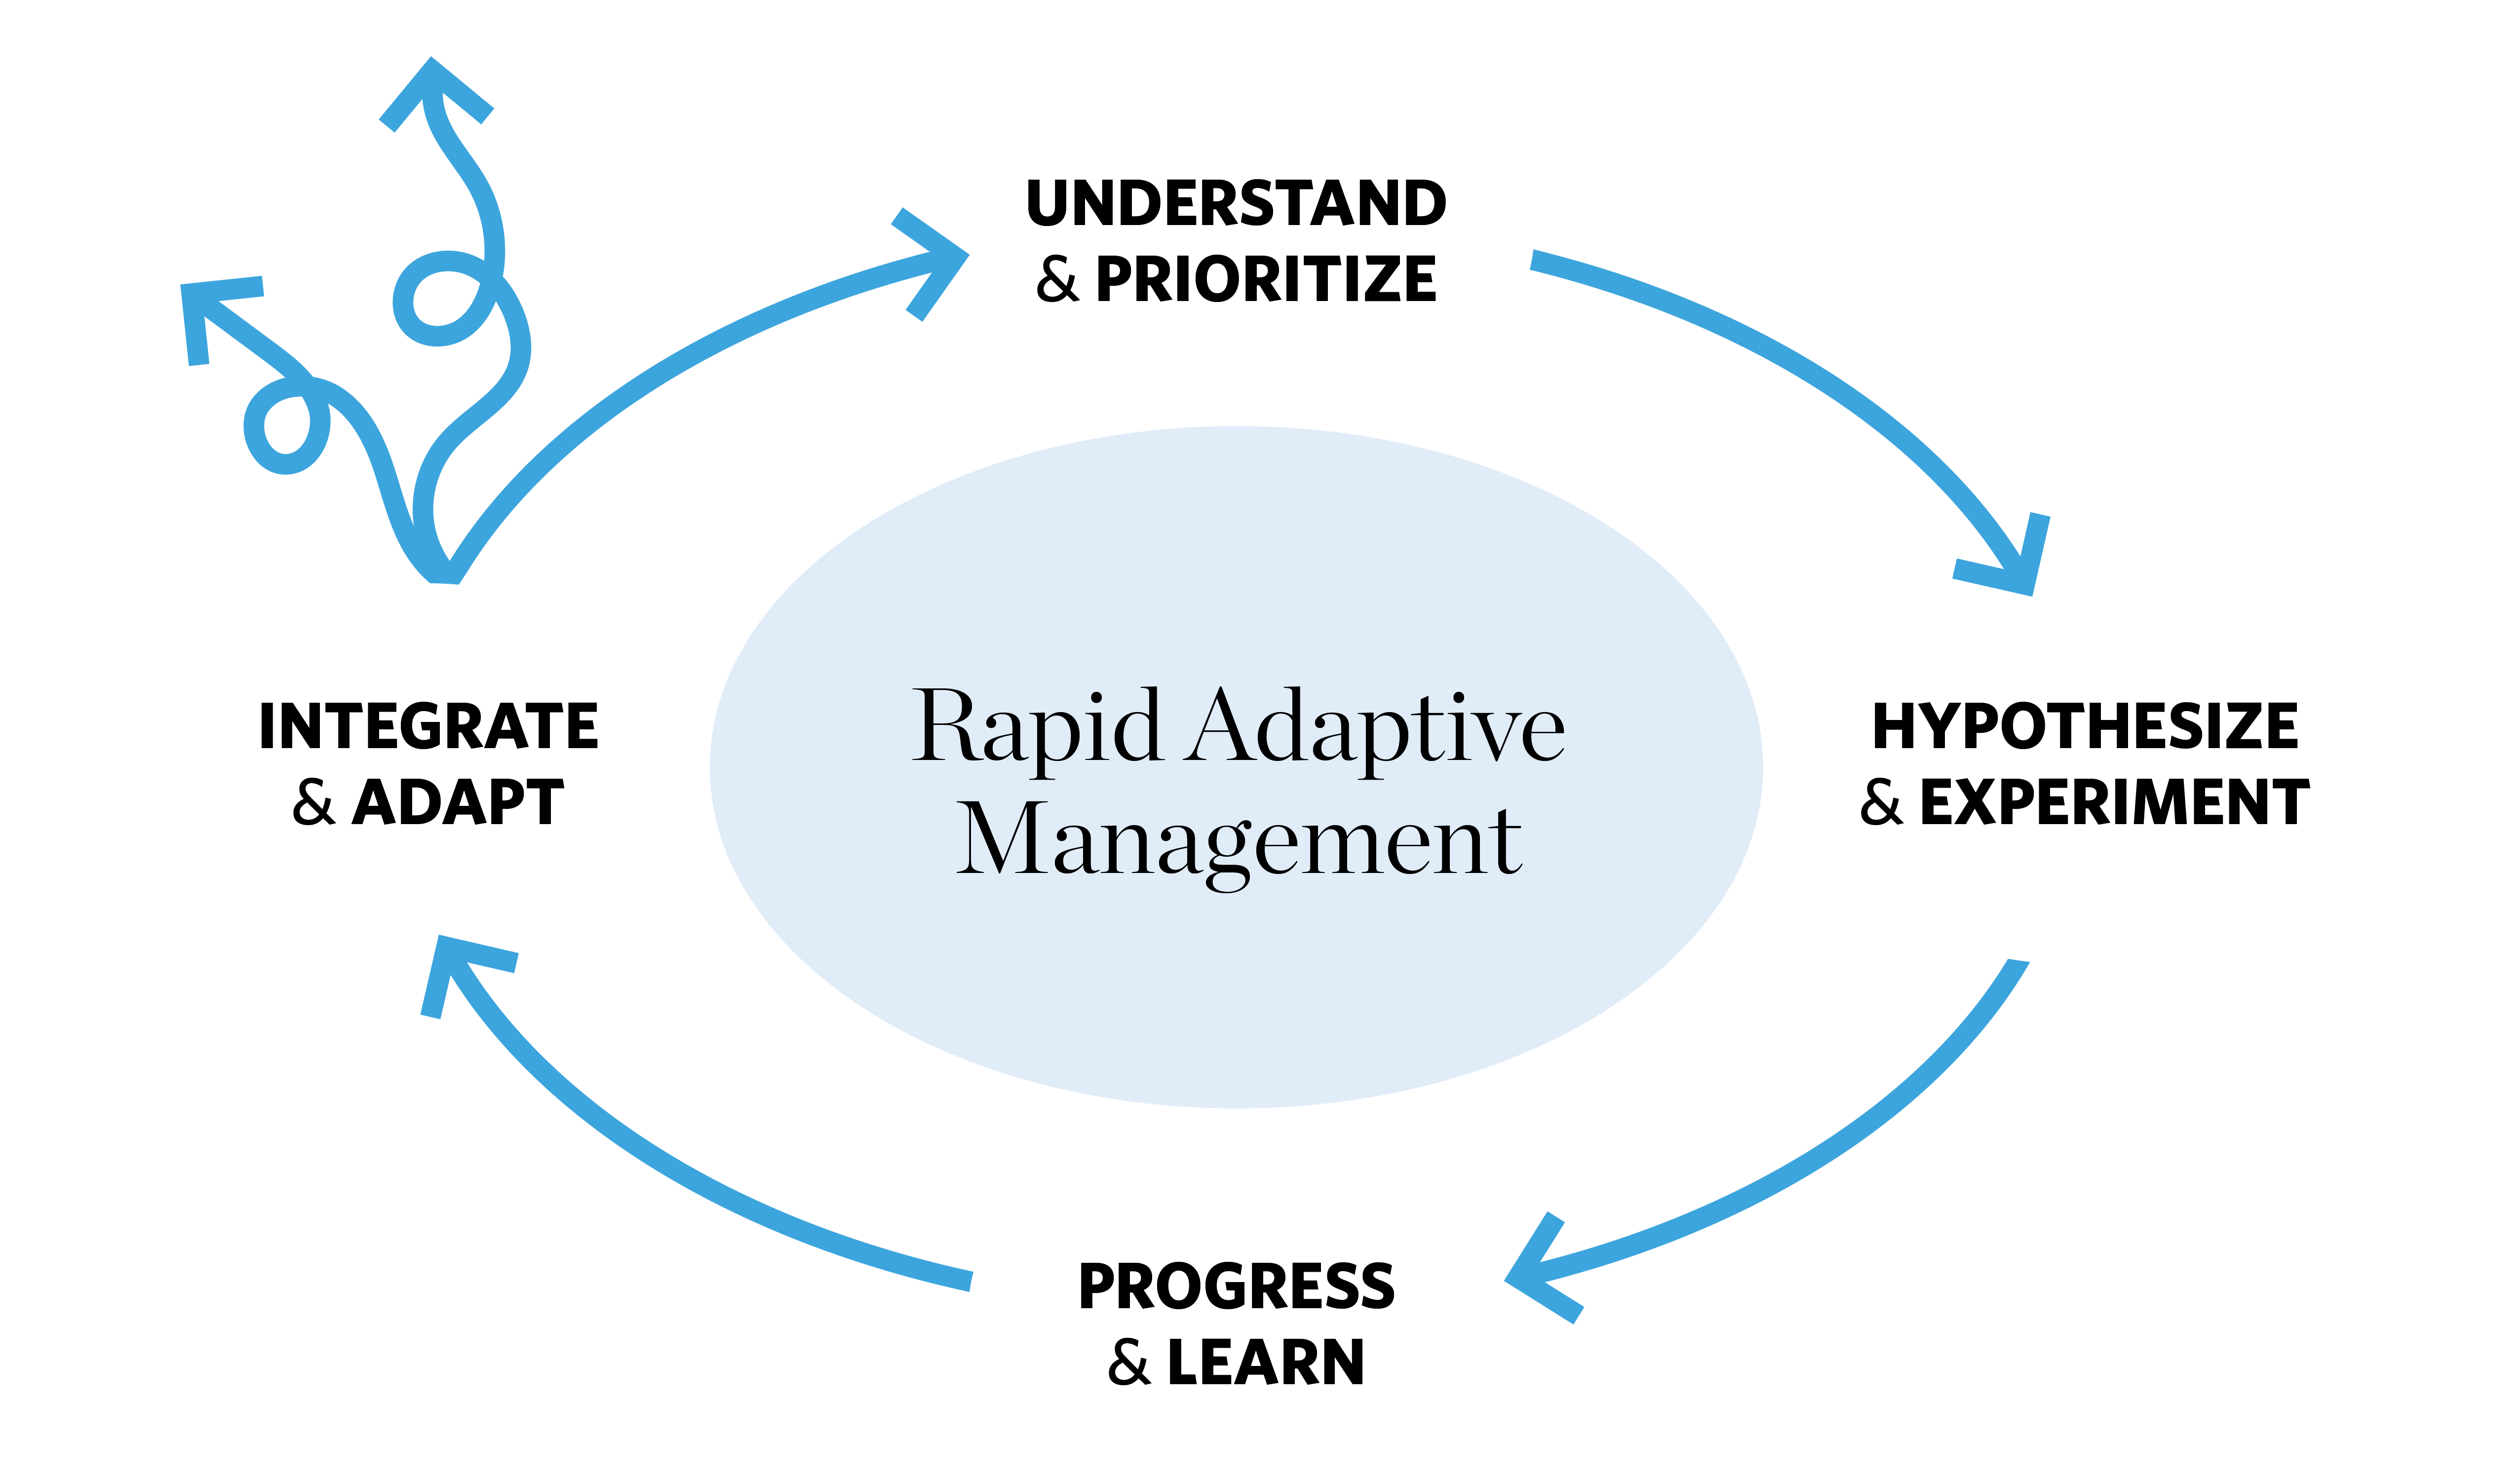 a circular flow chart showing the four stages of Rapid Adaptive Management, which are understand and prioritize, hypothesize and experiment, progress and learn, and integrate and adapt. The cycle keeps repeating, and two arrows splinter off from the last step showing ideas leaving the cycle.